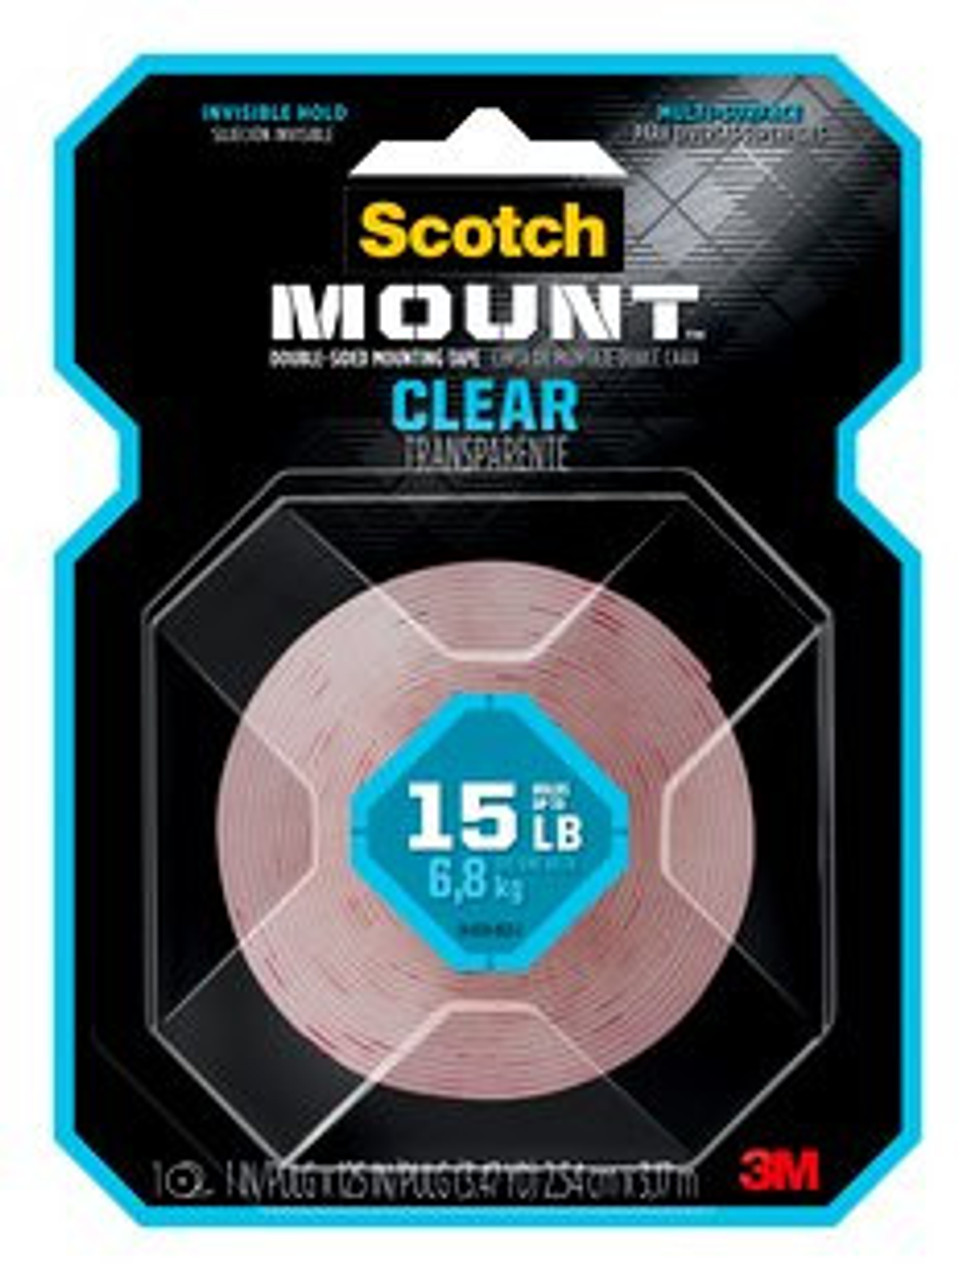 Scotch-Mount Clear Double-Sided Mounting Tape 410H-MED, 1 in x 125 in (2.54 cm x 3.17 M)